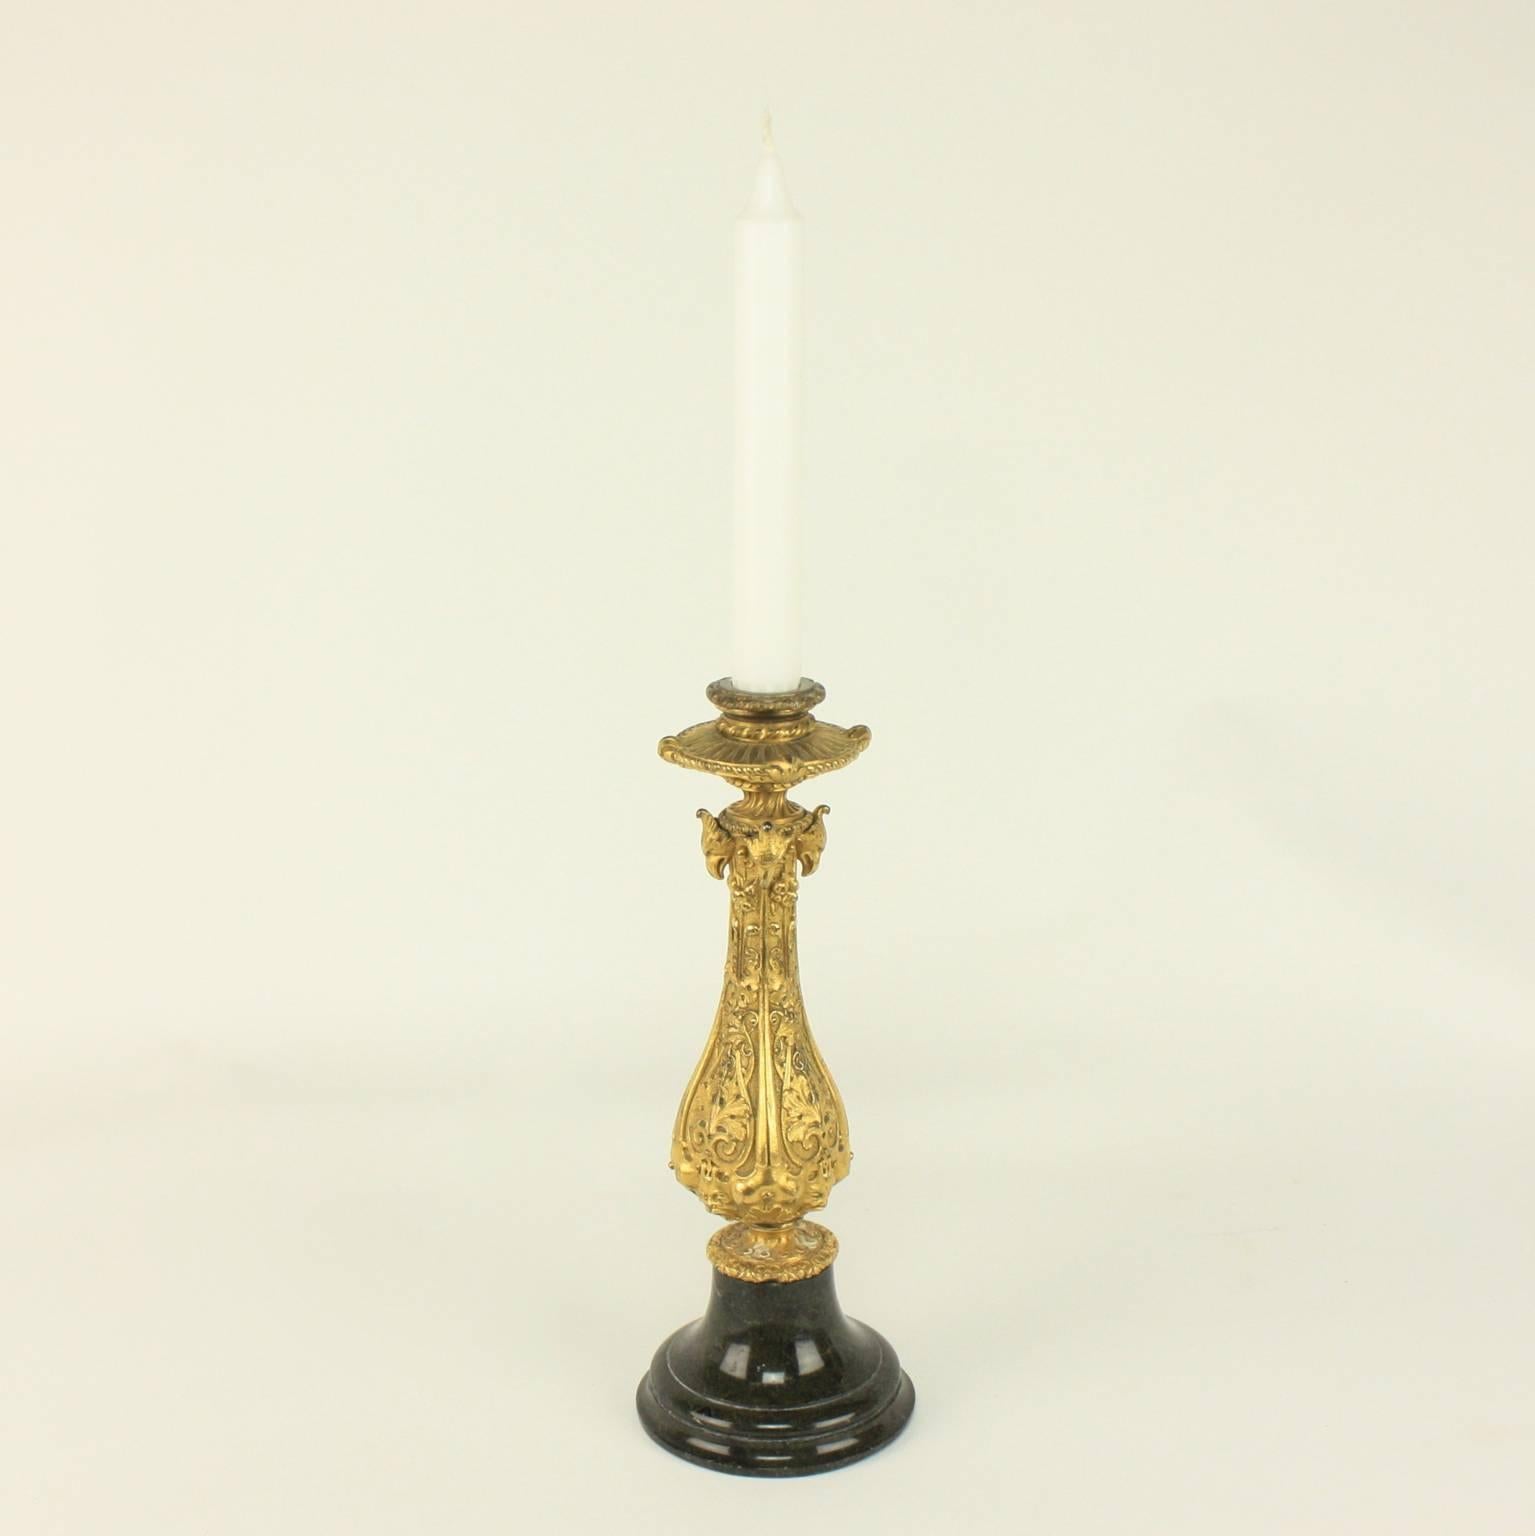 A 19th century Renaissance Revival gilt bronze candlestick on a Belgium black marble base. The socket rests on a four-sided baluster stem; each chased with elongated female-headed birds, so-called harpies, grotesque masks, strap work and acanthus